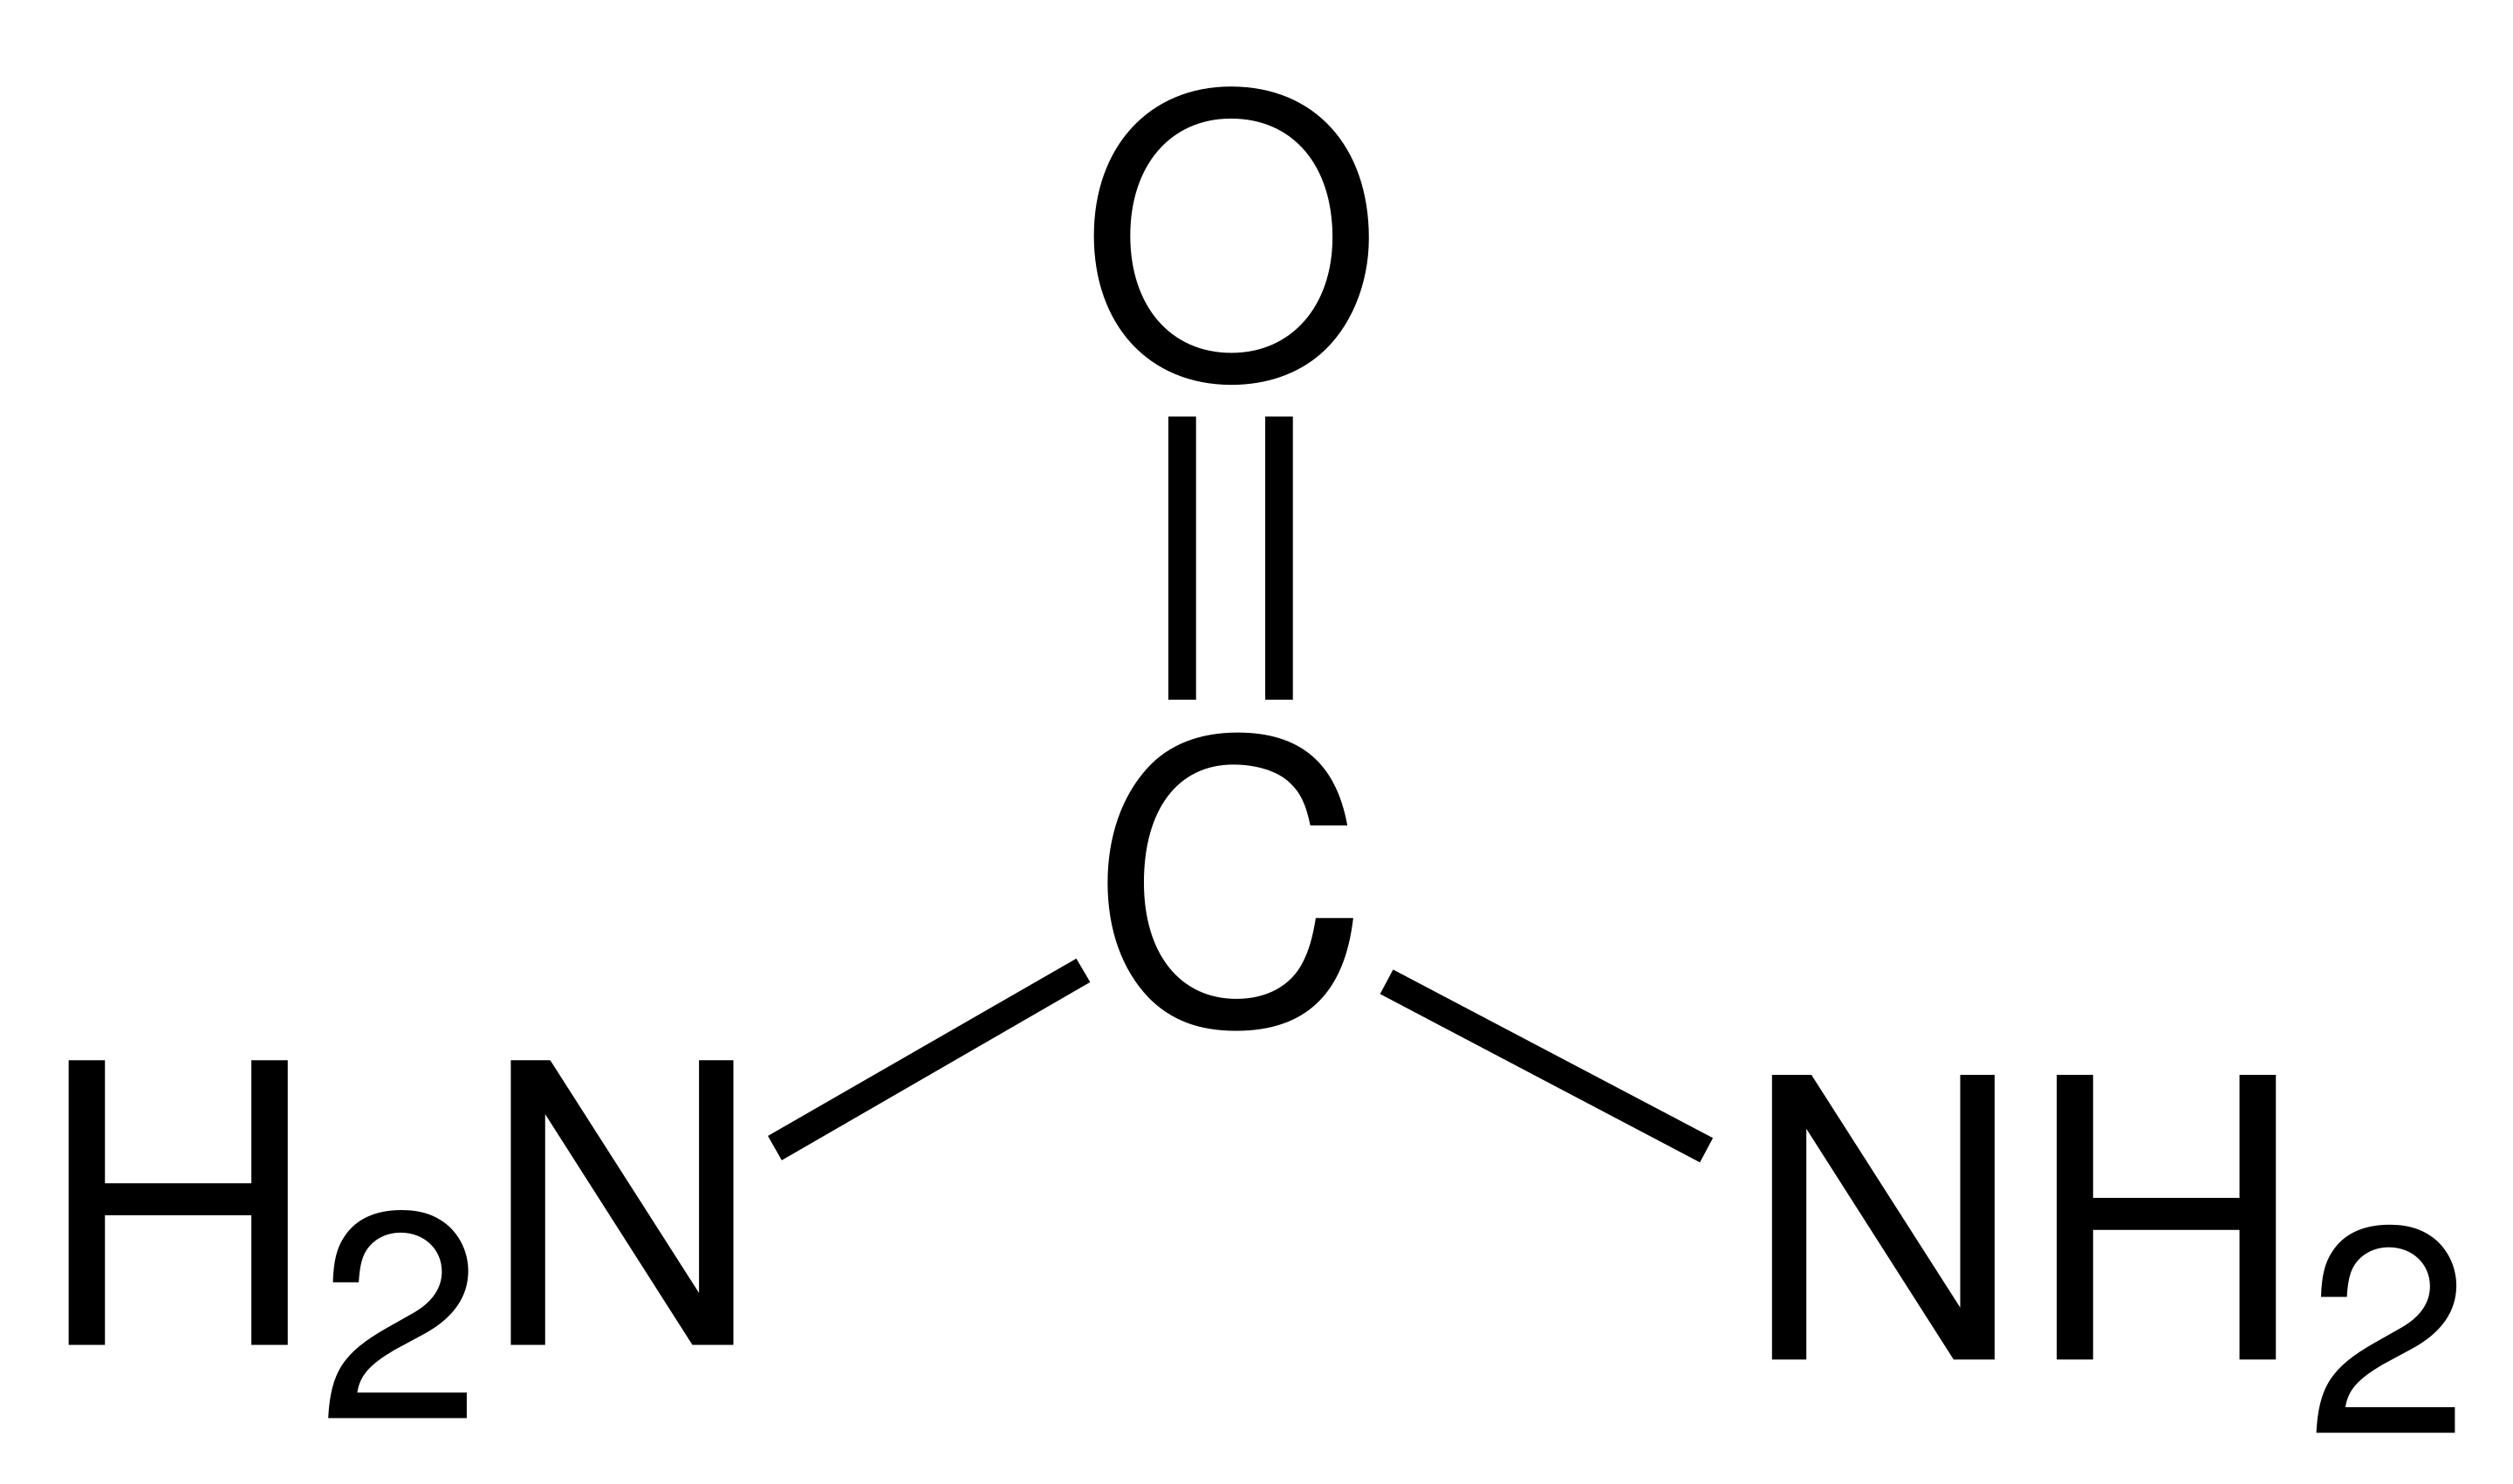 chemical structure of urea